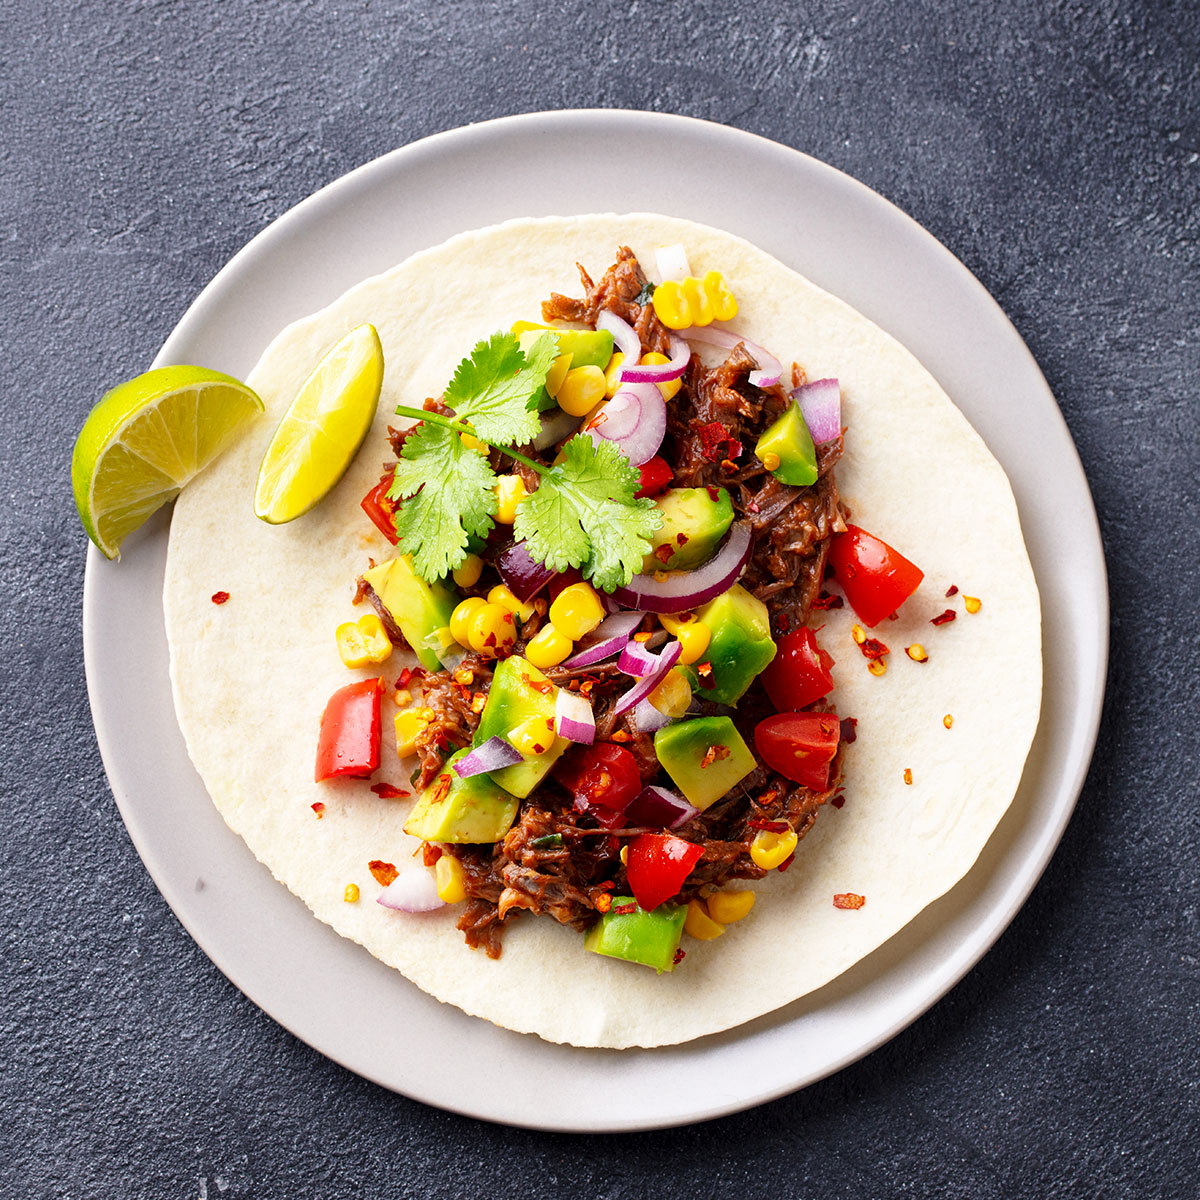 Taco meat will last in the fridge for 3-4 days. The spices used in taco meat have antimicrobial properties, which help to kill any harmful bacteria that could cause the meat to spoil.